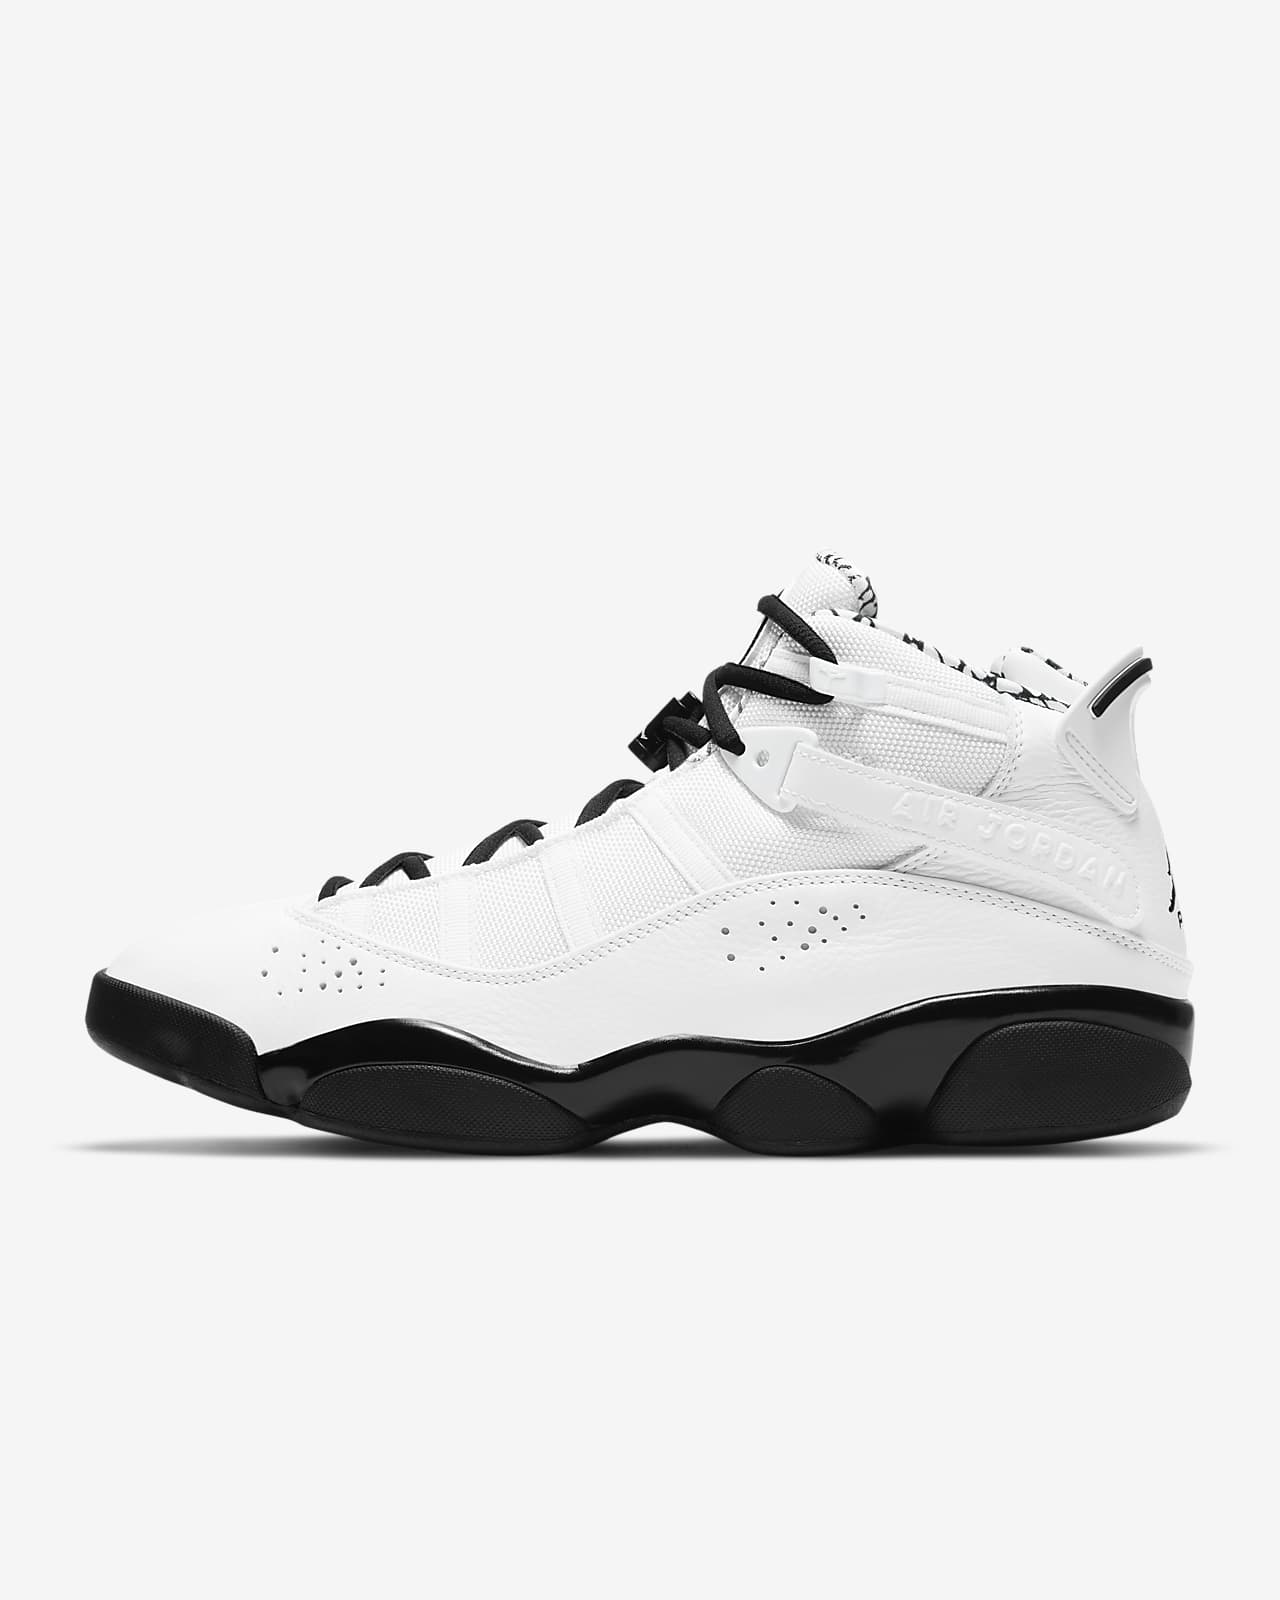 nike air jordan 6 ring - Online Discount Shop for Electronics, Apparel,  Toys, Books, Games, Computers, Shoes, Jewelry, Watches, Baby Products,  Sports \u0026 Outdoors, Office Products, Bed \u0026 Bath, Furniture, Tools, Hardware,